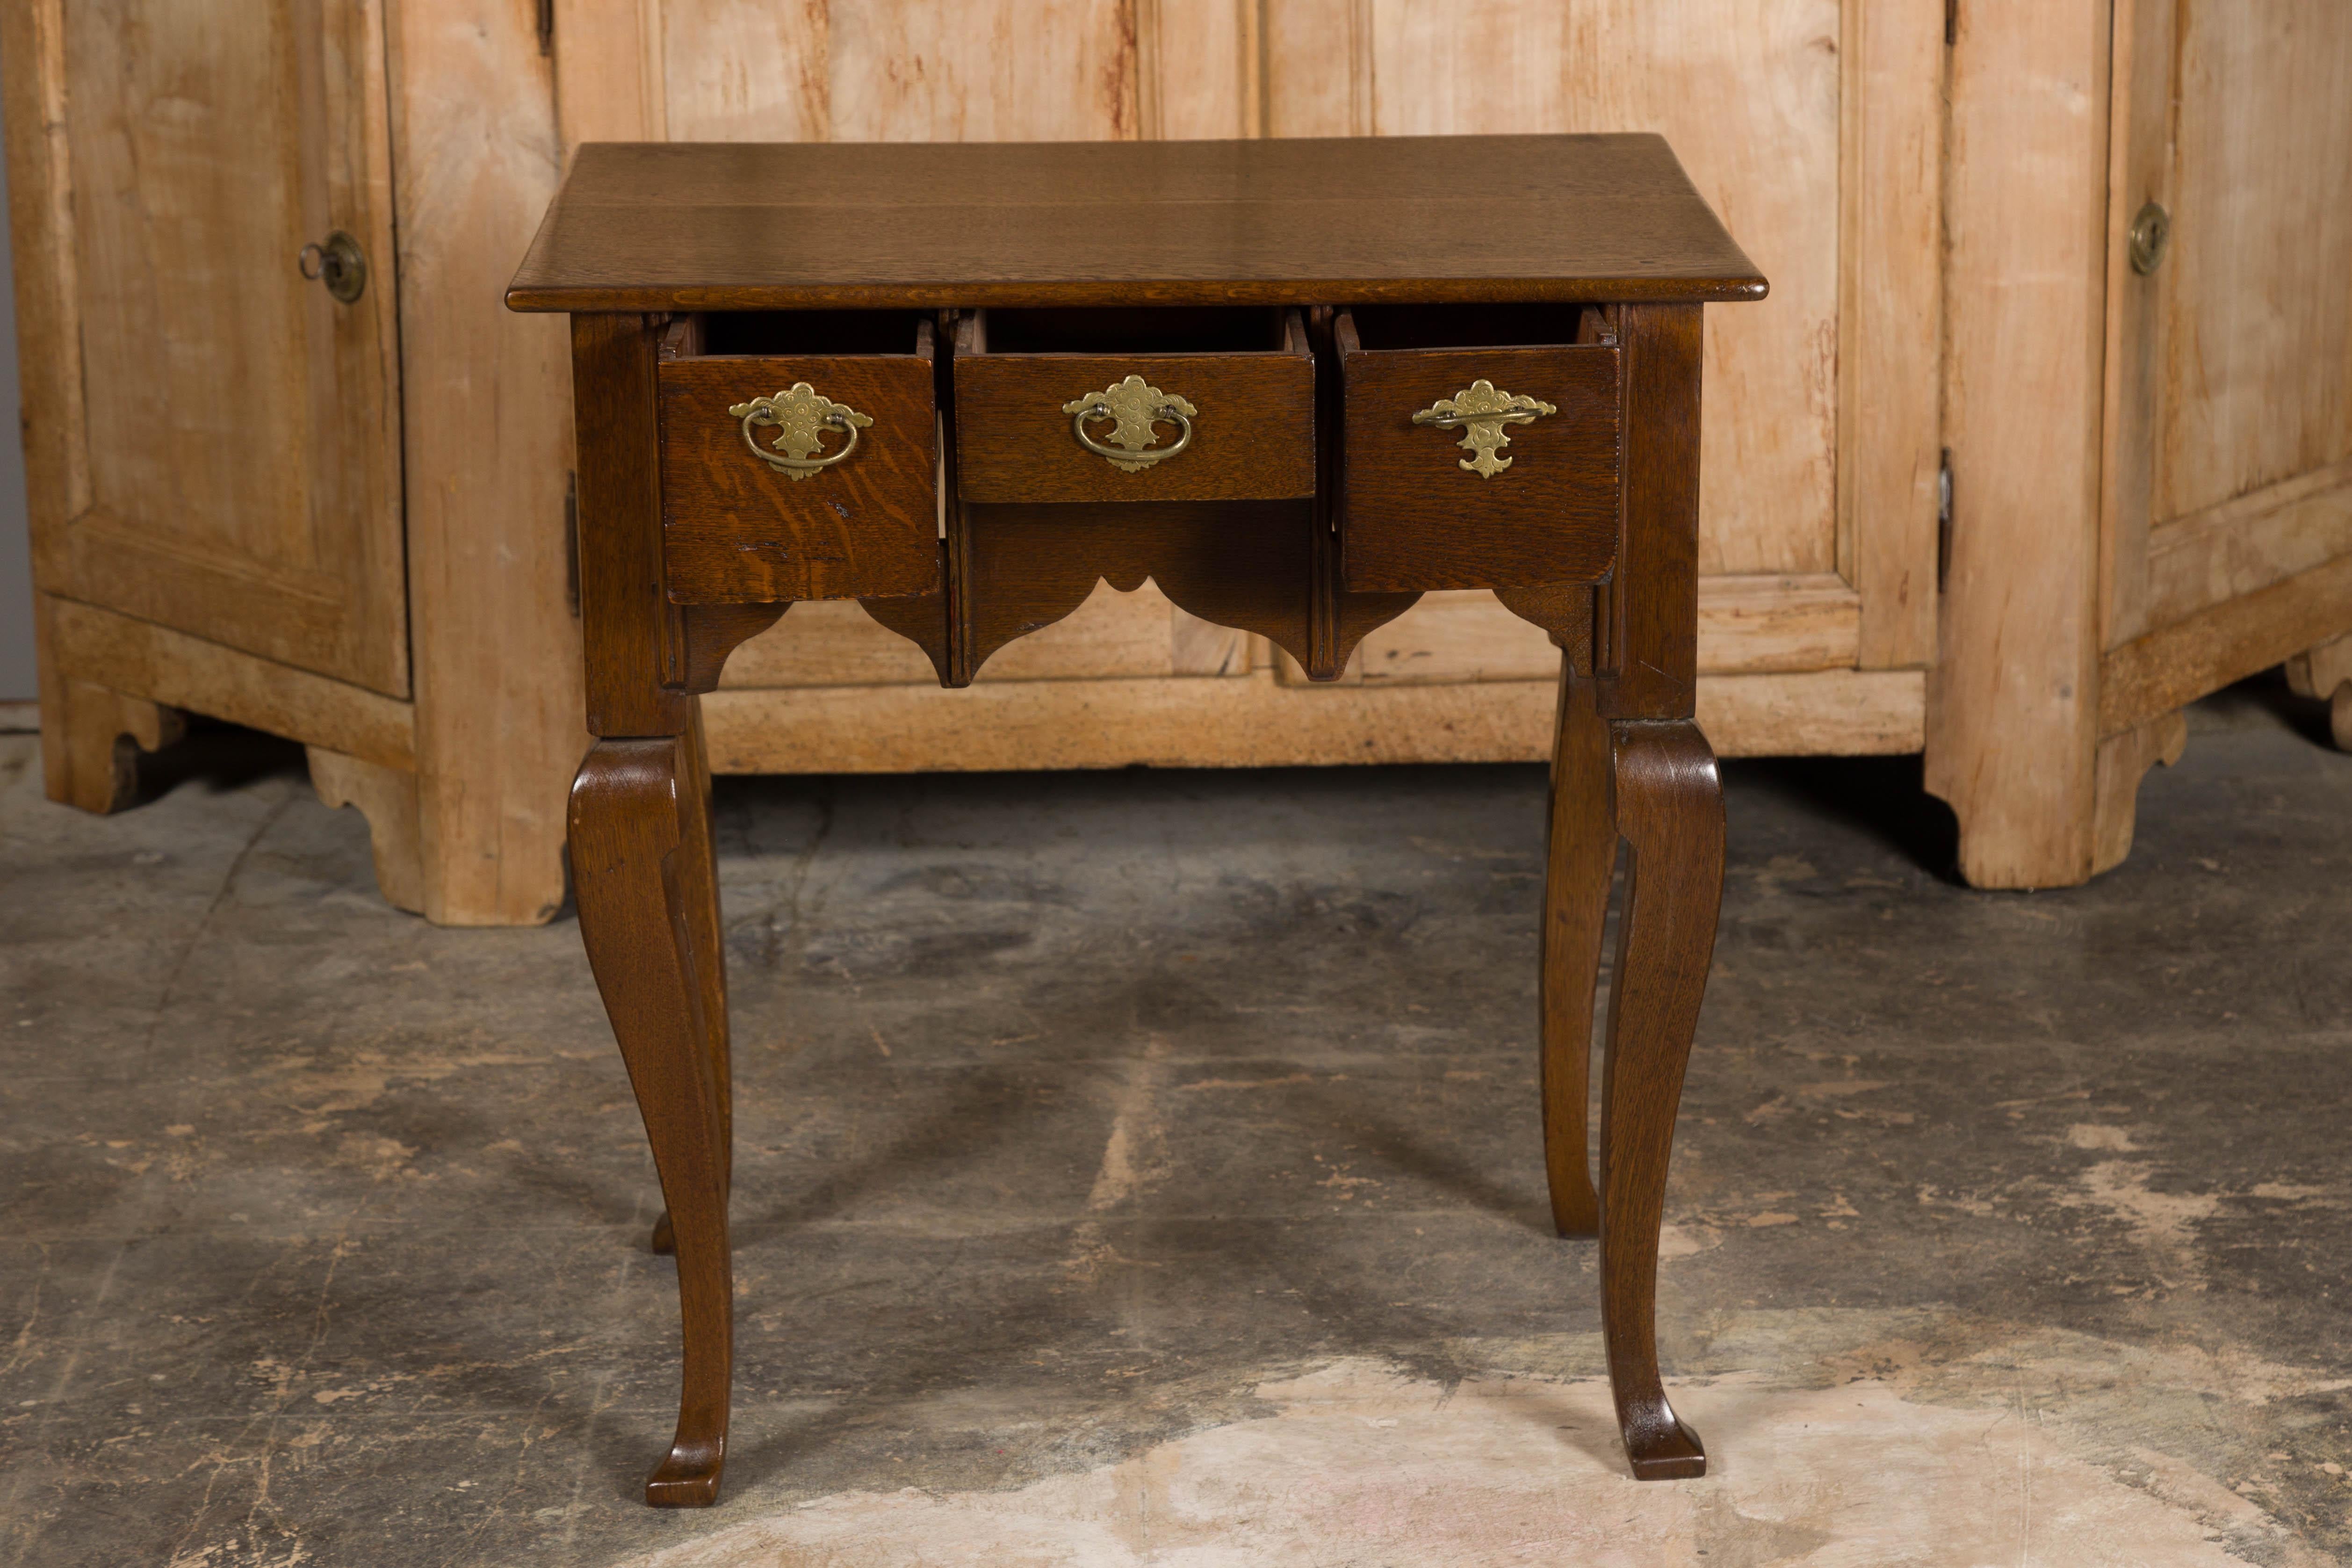 English Georgian 19th Century Oak Table with Three Drawers and Cabriole Legs For Sale 8